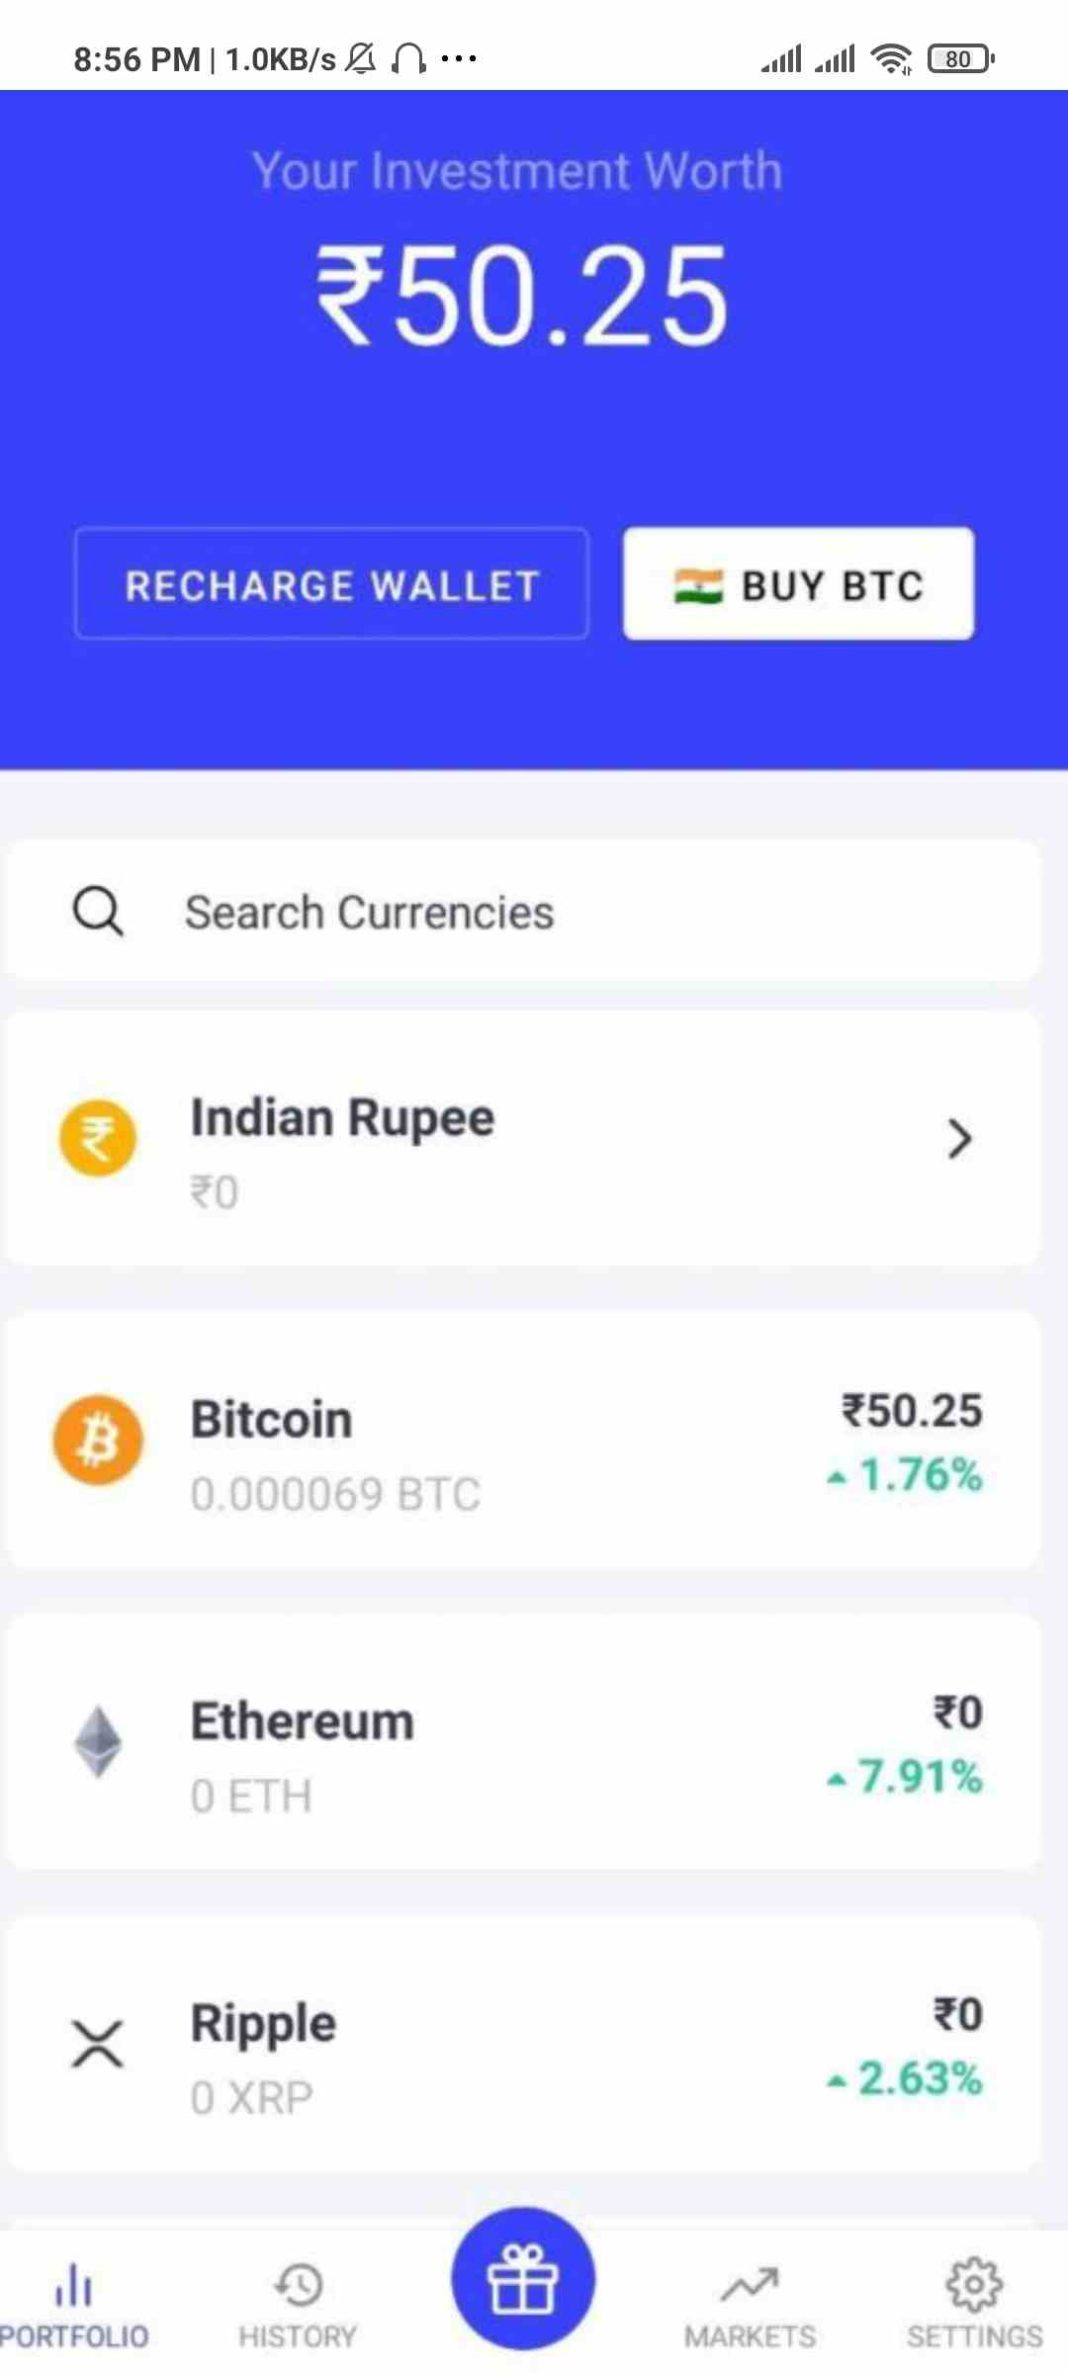 CoinSwitch Kuber App Offer - Sign Up ₹50 + Refer/₹50 FREE ...